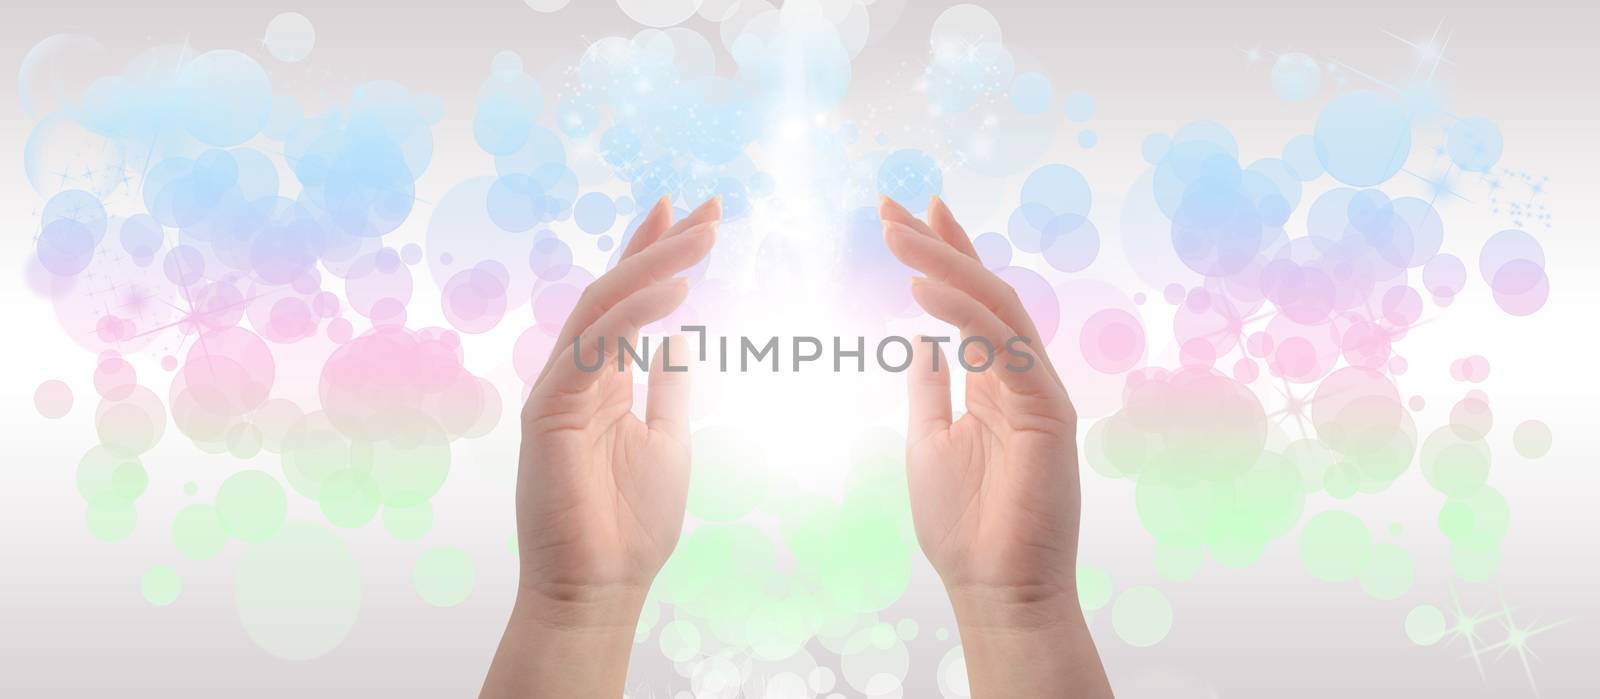 Healing Hands on a sparkling pastel coloured background